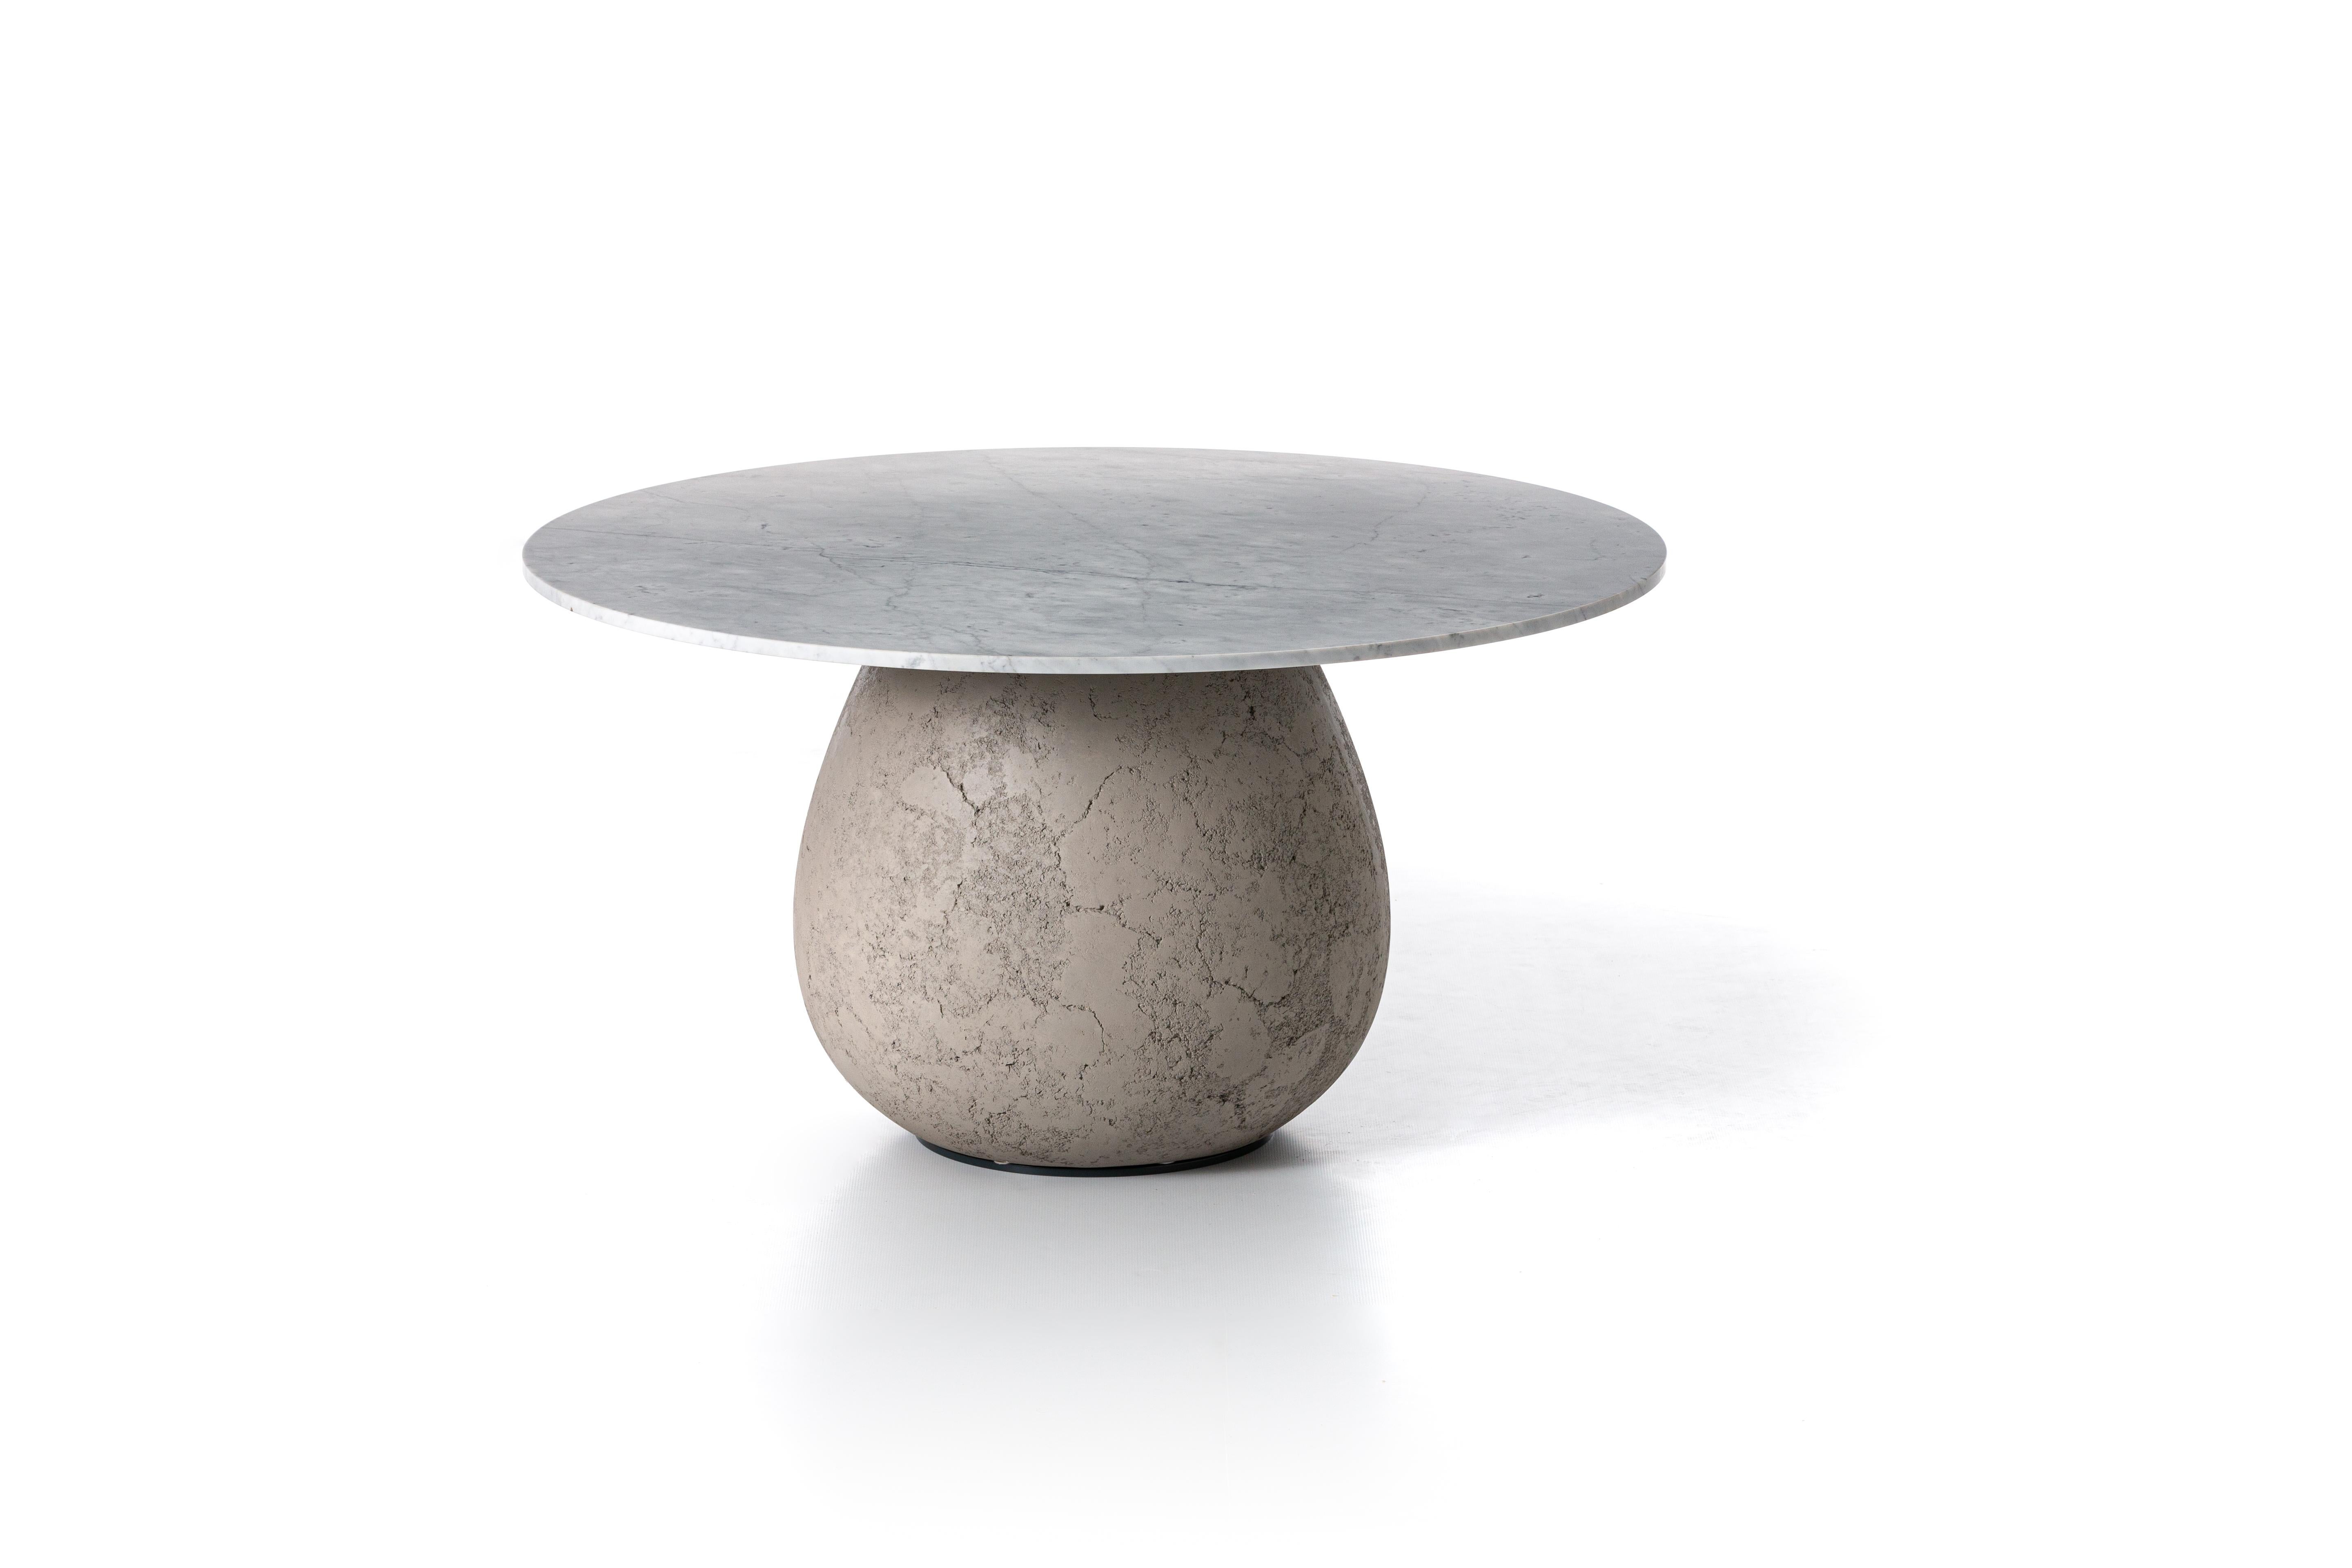 Full volumes and rounded shapes characterise the Next 232/236 table family. Available in two sizes, they stand out thanks to the sculptural central base with full shapes, made of concrete with a crackle finish, while the top is in white Carrara